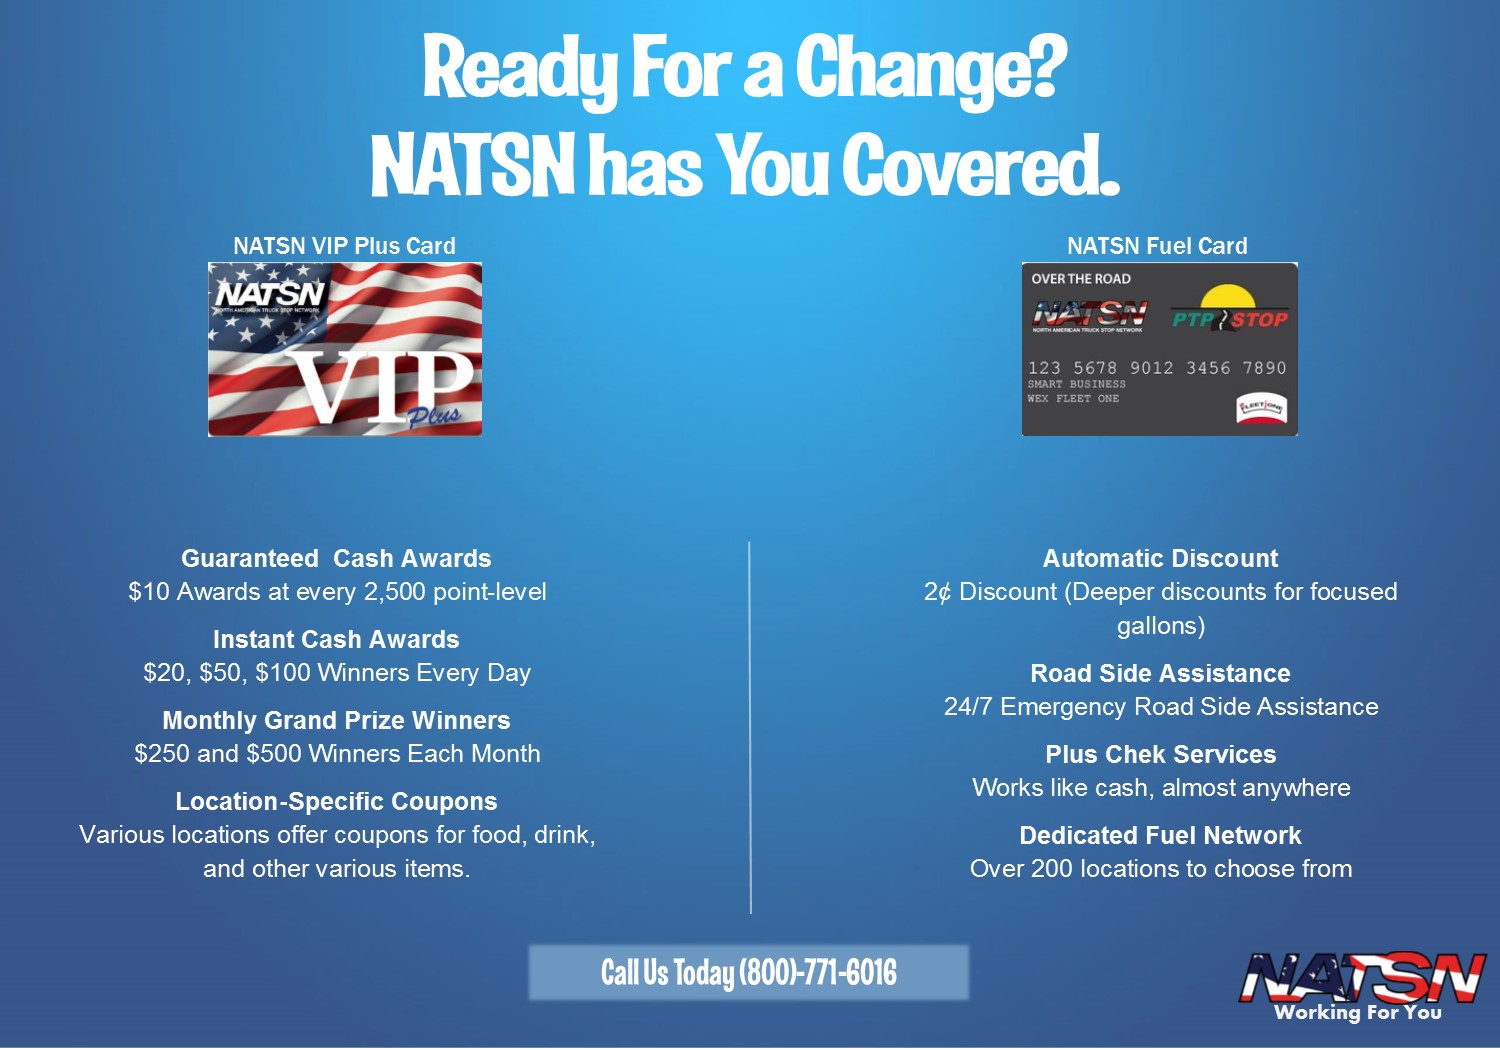 Fuel Card, Truck Driver, The Best Fuel Card, The Best Driver Loyalty Card, NATSN VIP Plus, Truck Stop, Discounts, NATSN, Fleet Card, Independent Truck Stop, Dedicated Network, Cash Prizes, 